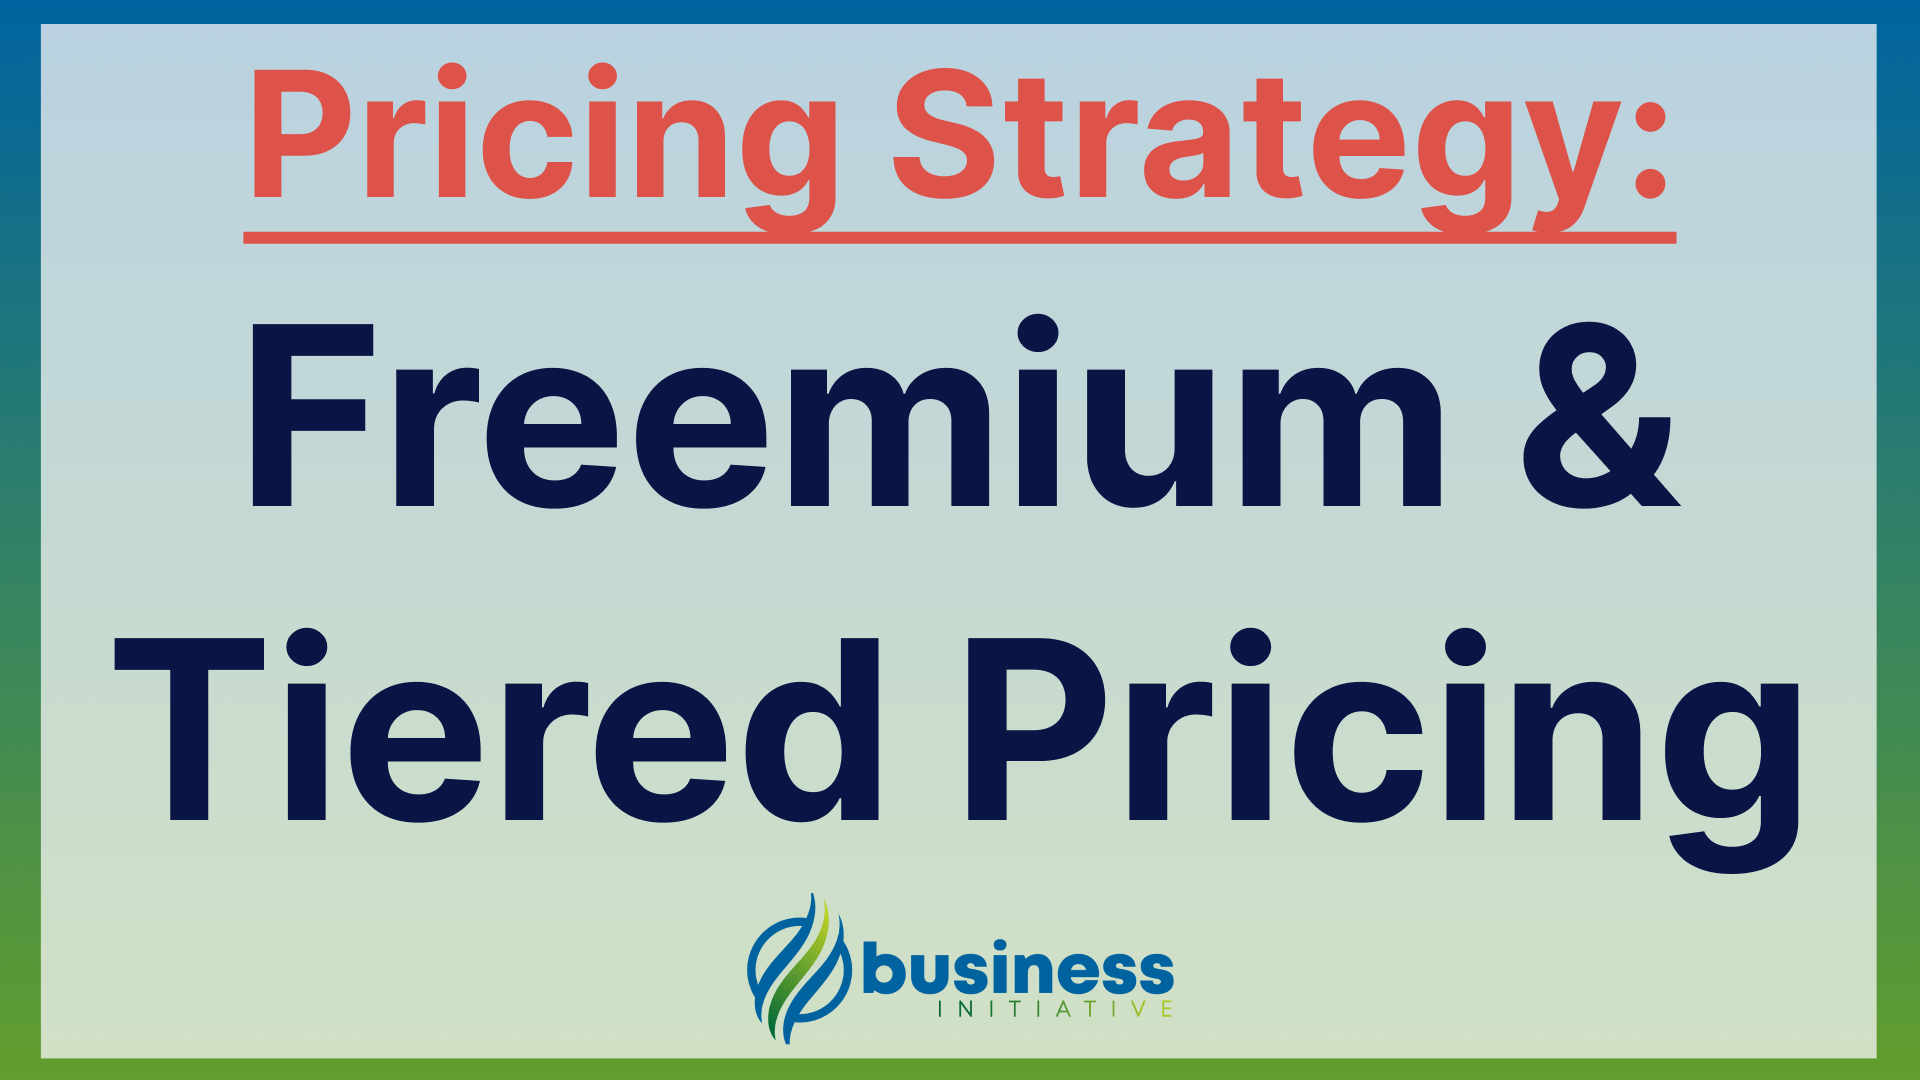 freemium and tiered pricing